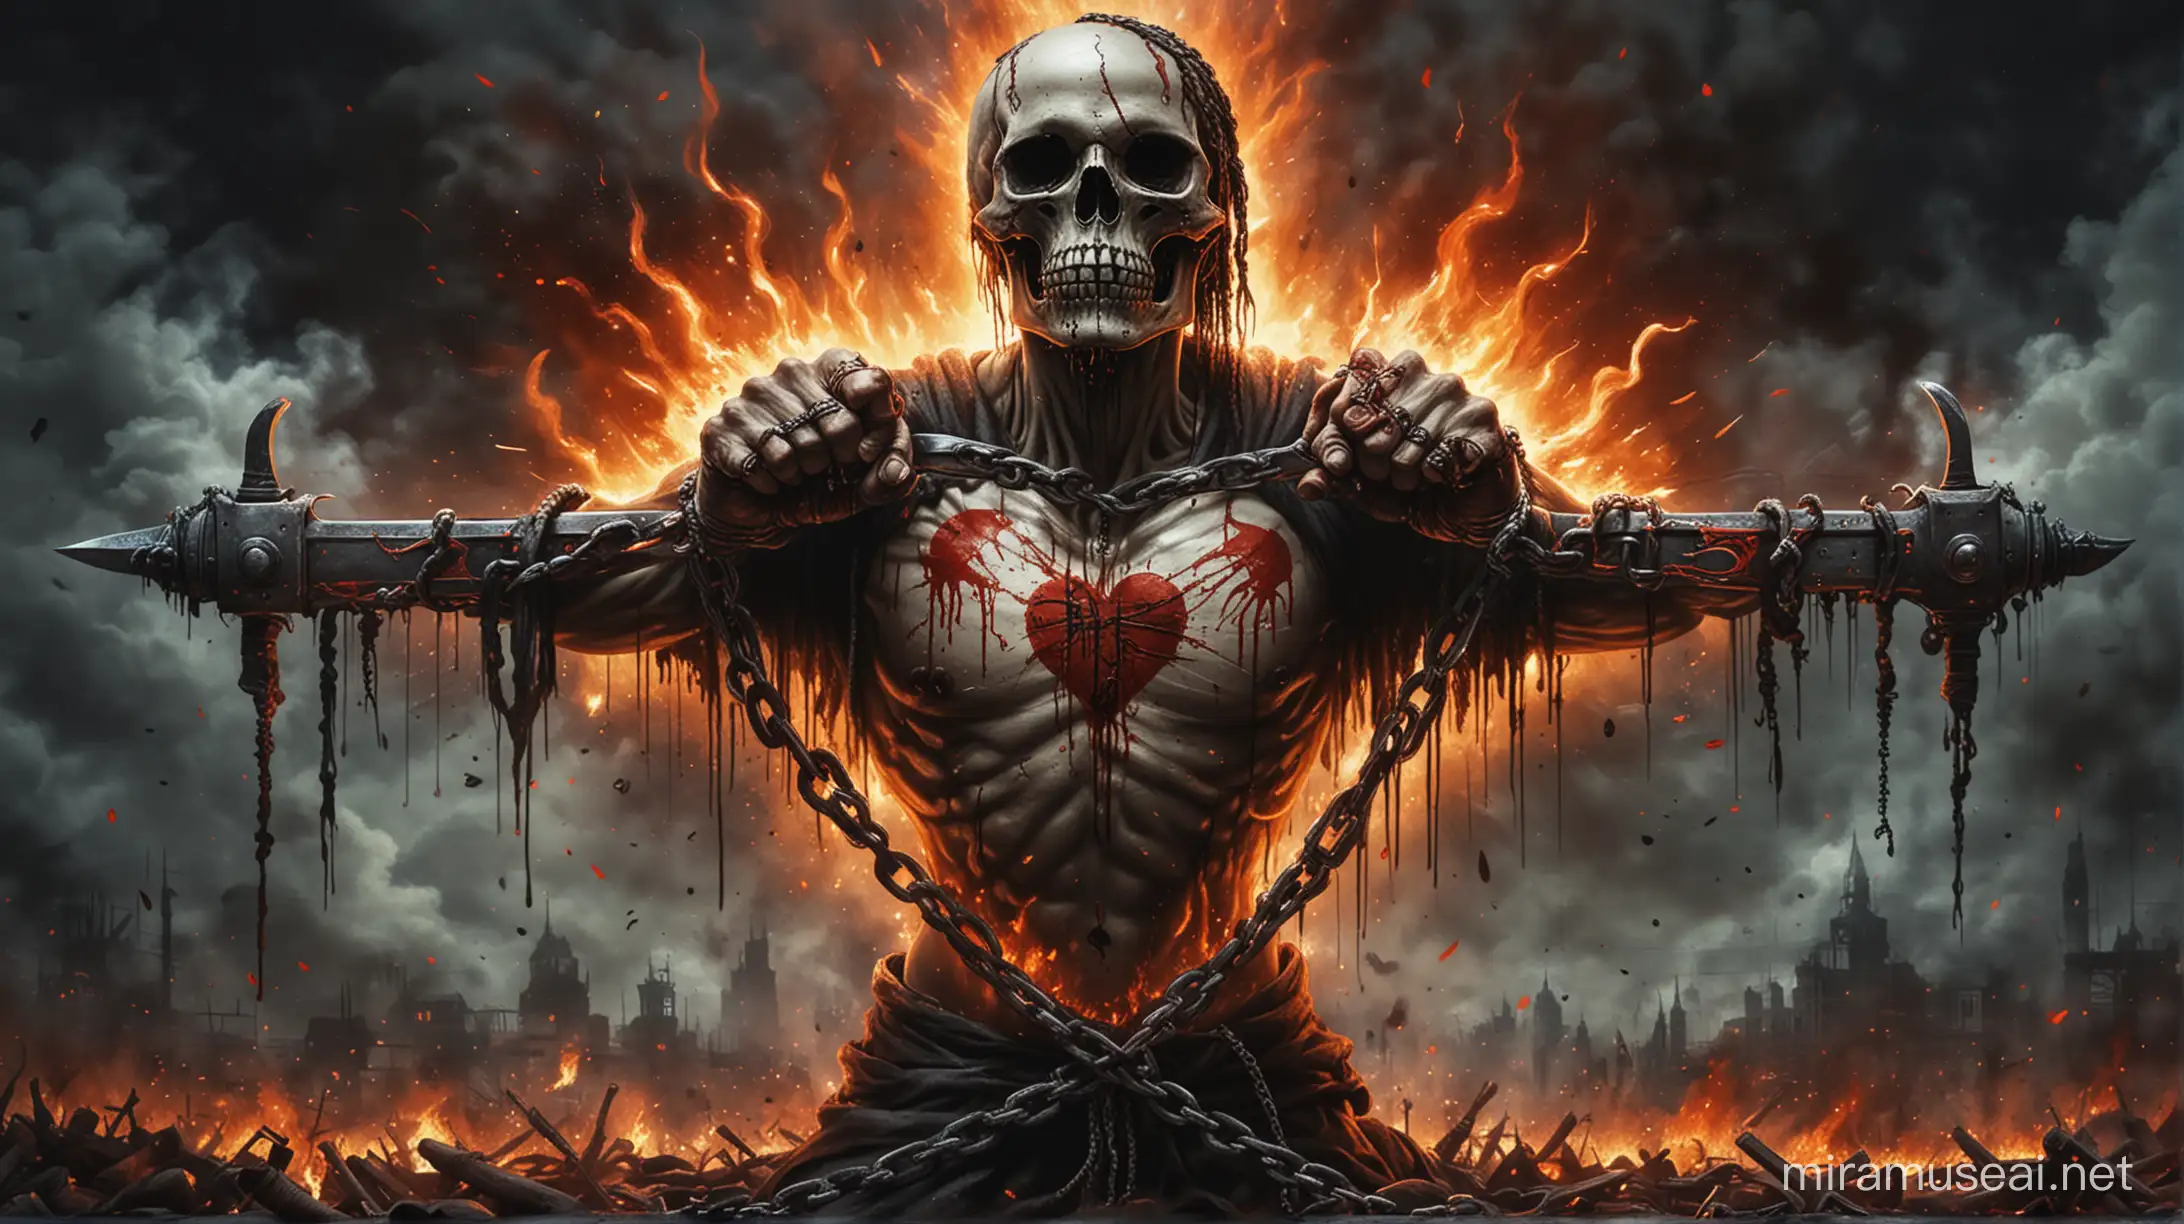 """

Depict a sword piercing through a heart with bloody hands.
Show a crowd rebelling against oppressors.
Depict a clenched fist emitting flames.
Skull: Symbol of death and destruction.
Fire: Symbol of anger and hatred.
Chains: Symbol of oppression and slavery.

"""